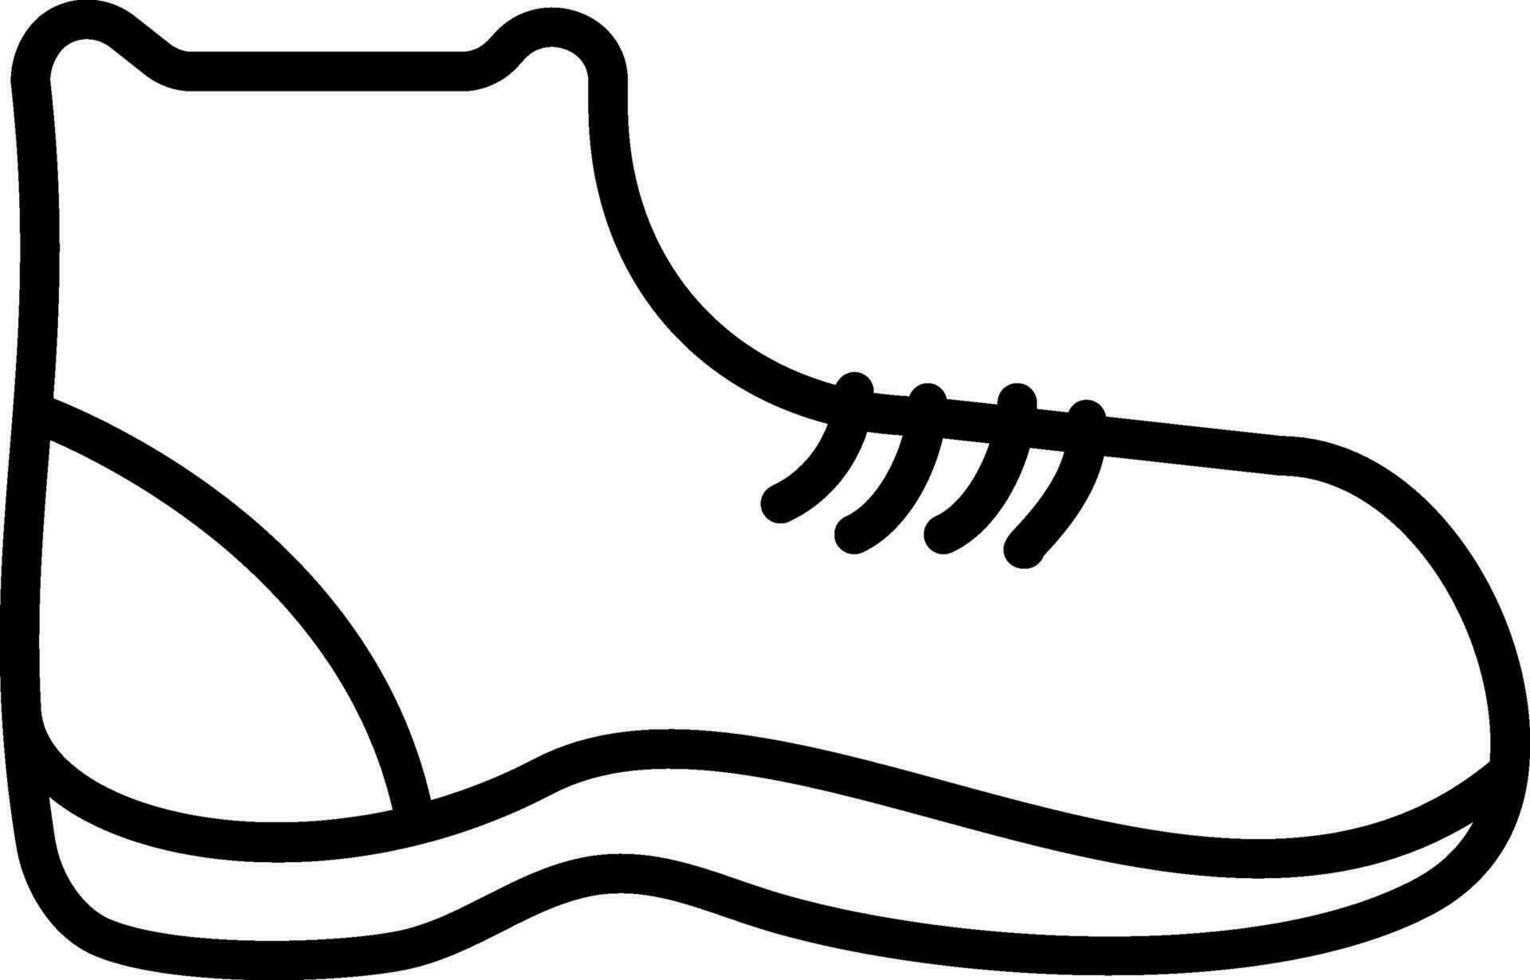 Black Linear Style Sneaker Icon Or Symbol. vector